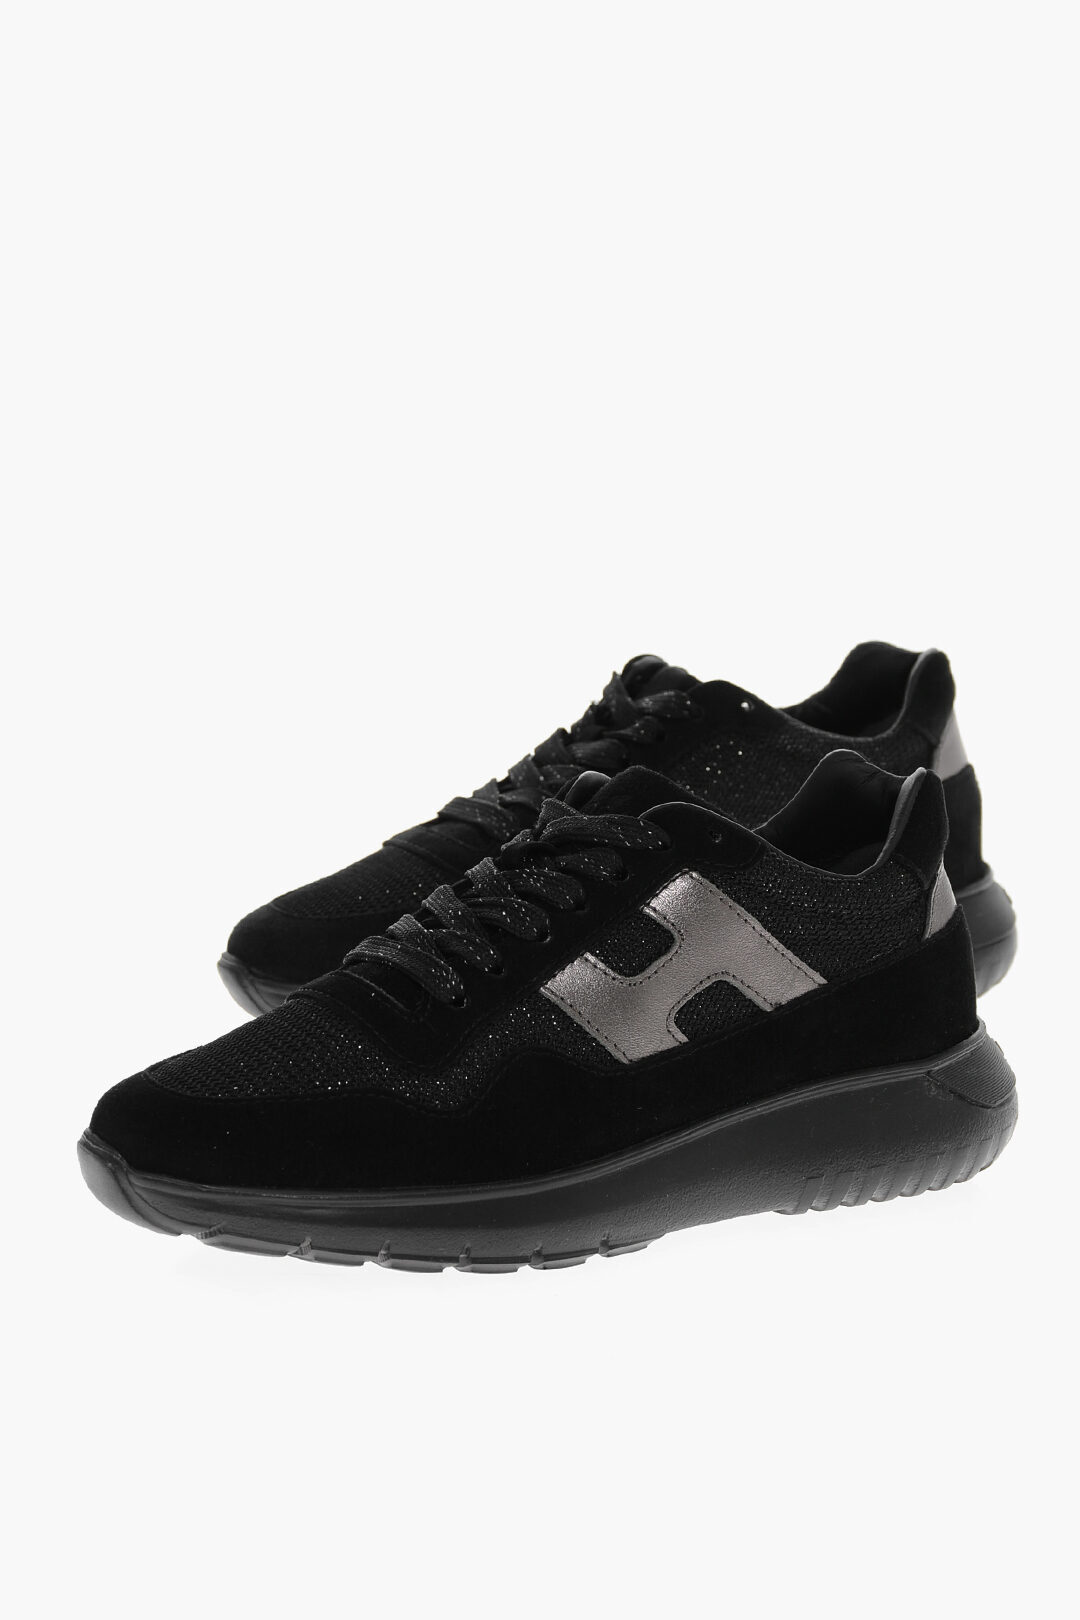 HOGAN ホーガン スニーカー HXW3710AP31BCO0564 レディース SUEDE INTERACTIVE SNEAKERS WITH LUREX DETAIL 【関税・送料無料】【ラッピング無料】 dk